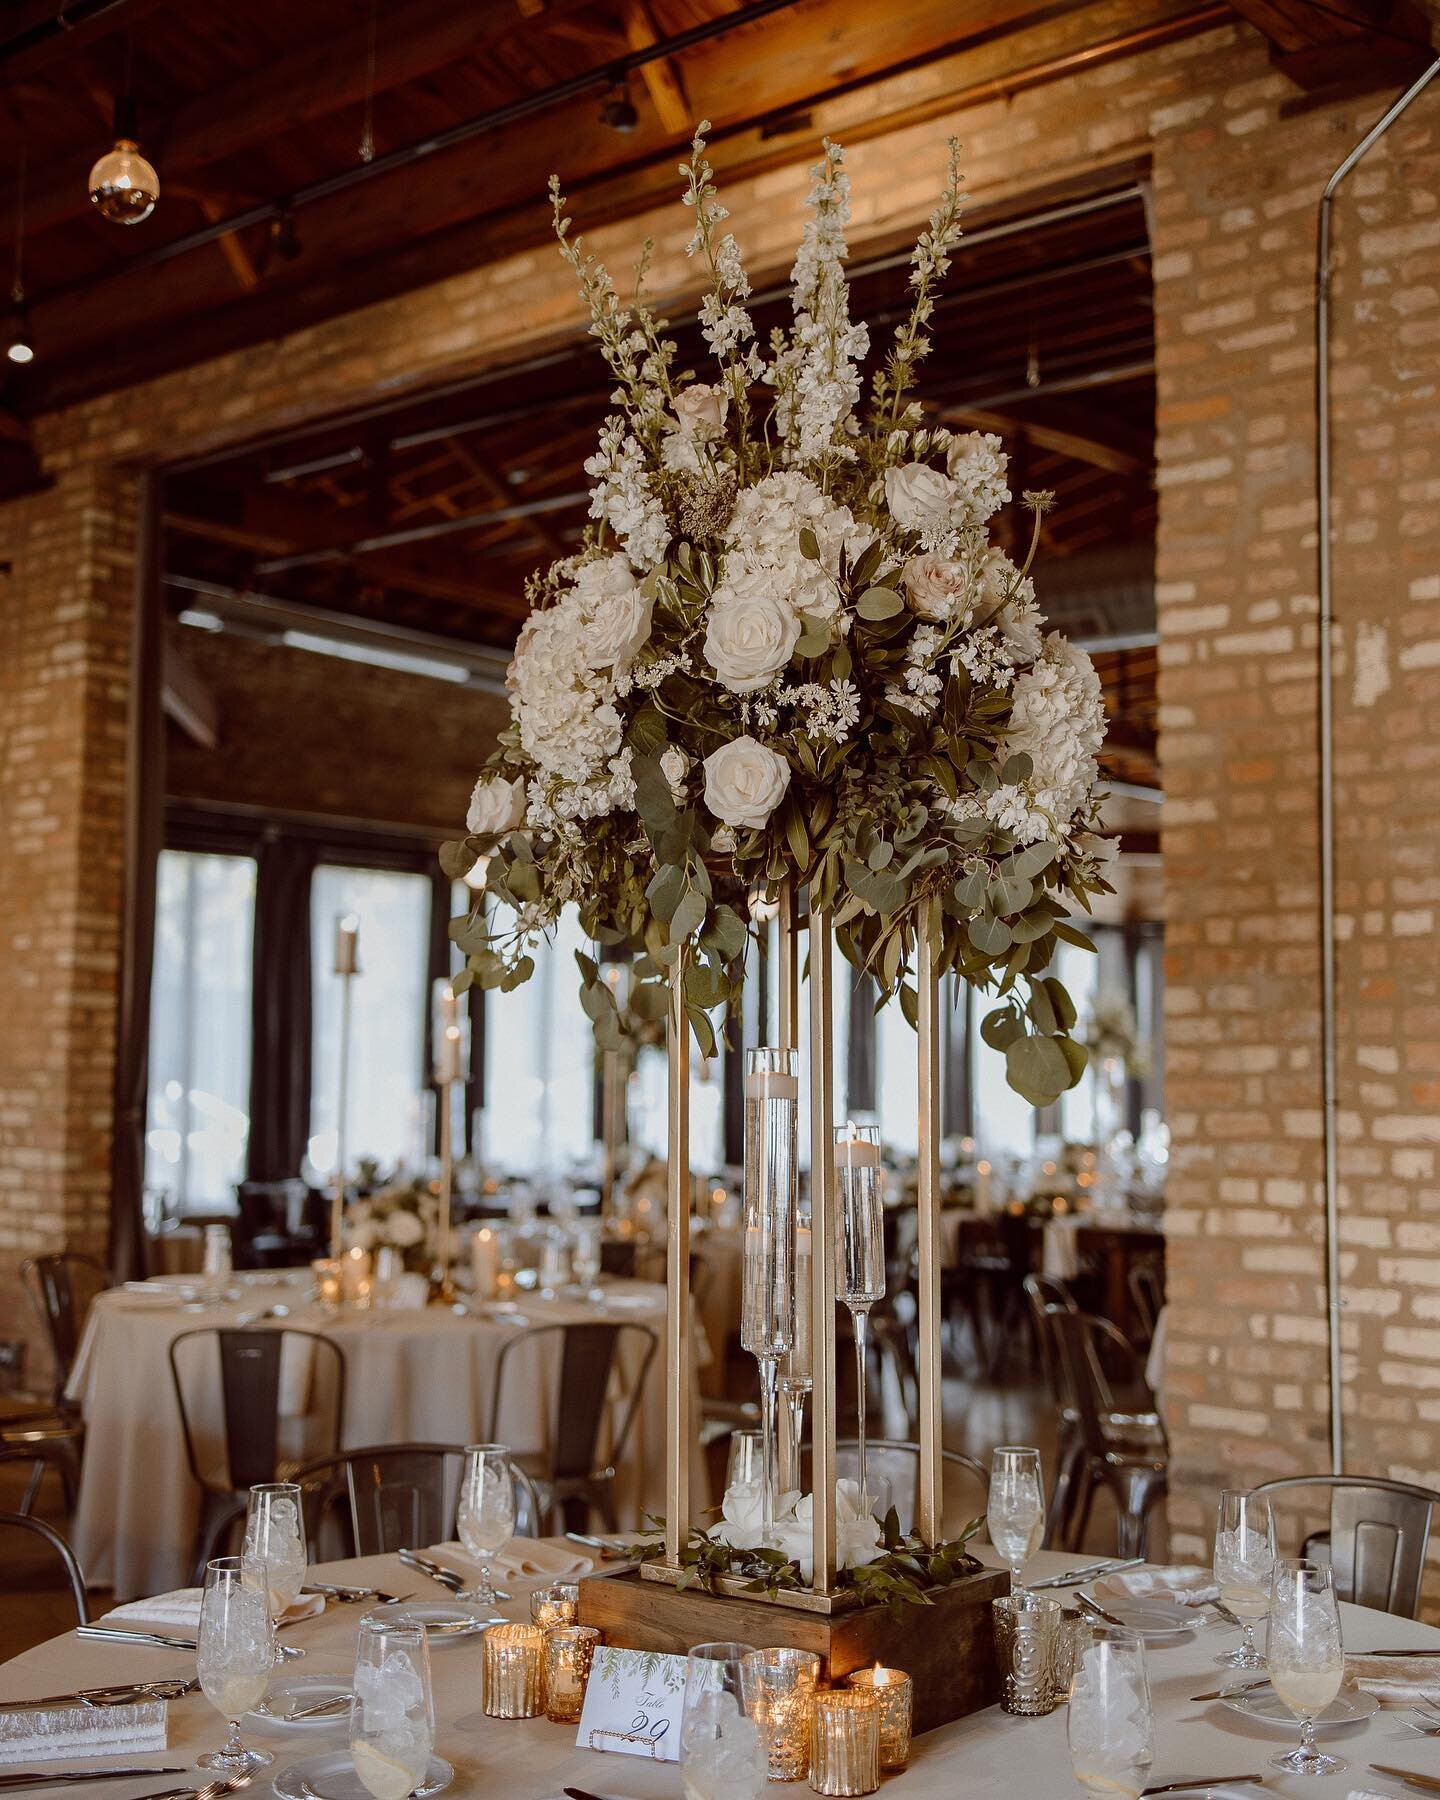 Talk about wow-factor!

These floral &amp; candle centerpieces from Anna &amp; Wills big day were nothing short of a dream 🤩
.
.
.
.
Photo: @hellohanallc 
Bar: @hardlyshaken 
Planning &amp; Design: @manikasdesigns
Floral: @phillips_flowers 
Catering